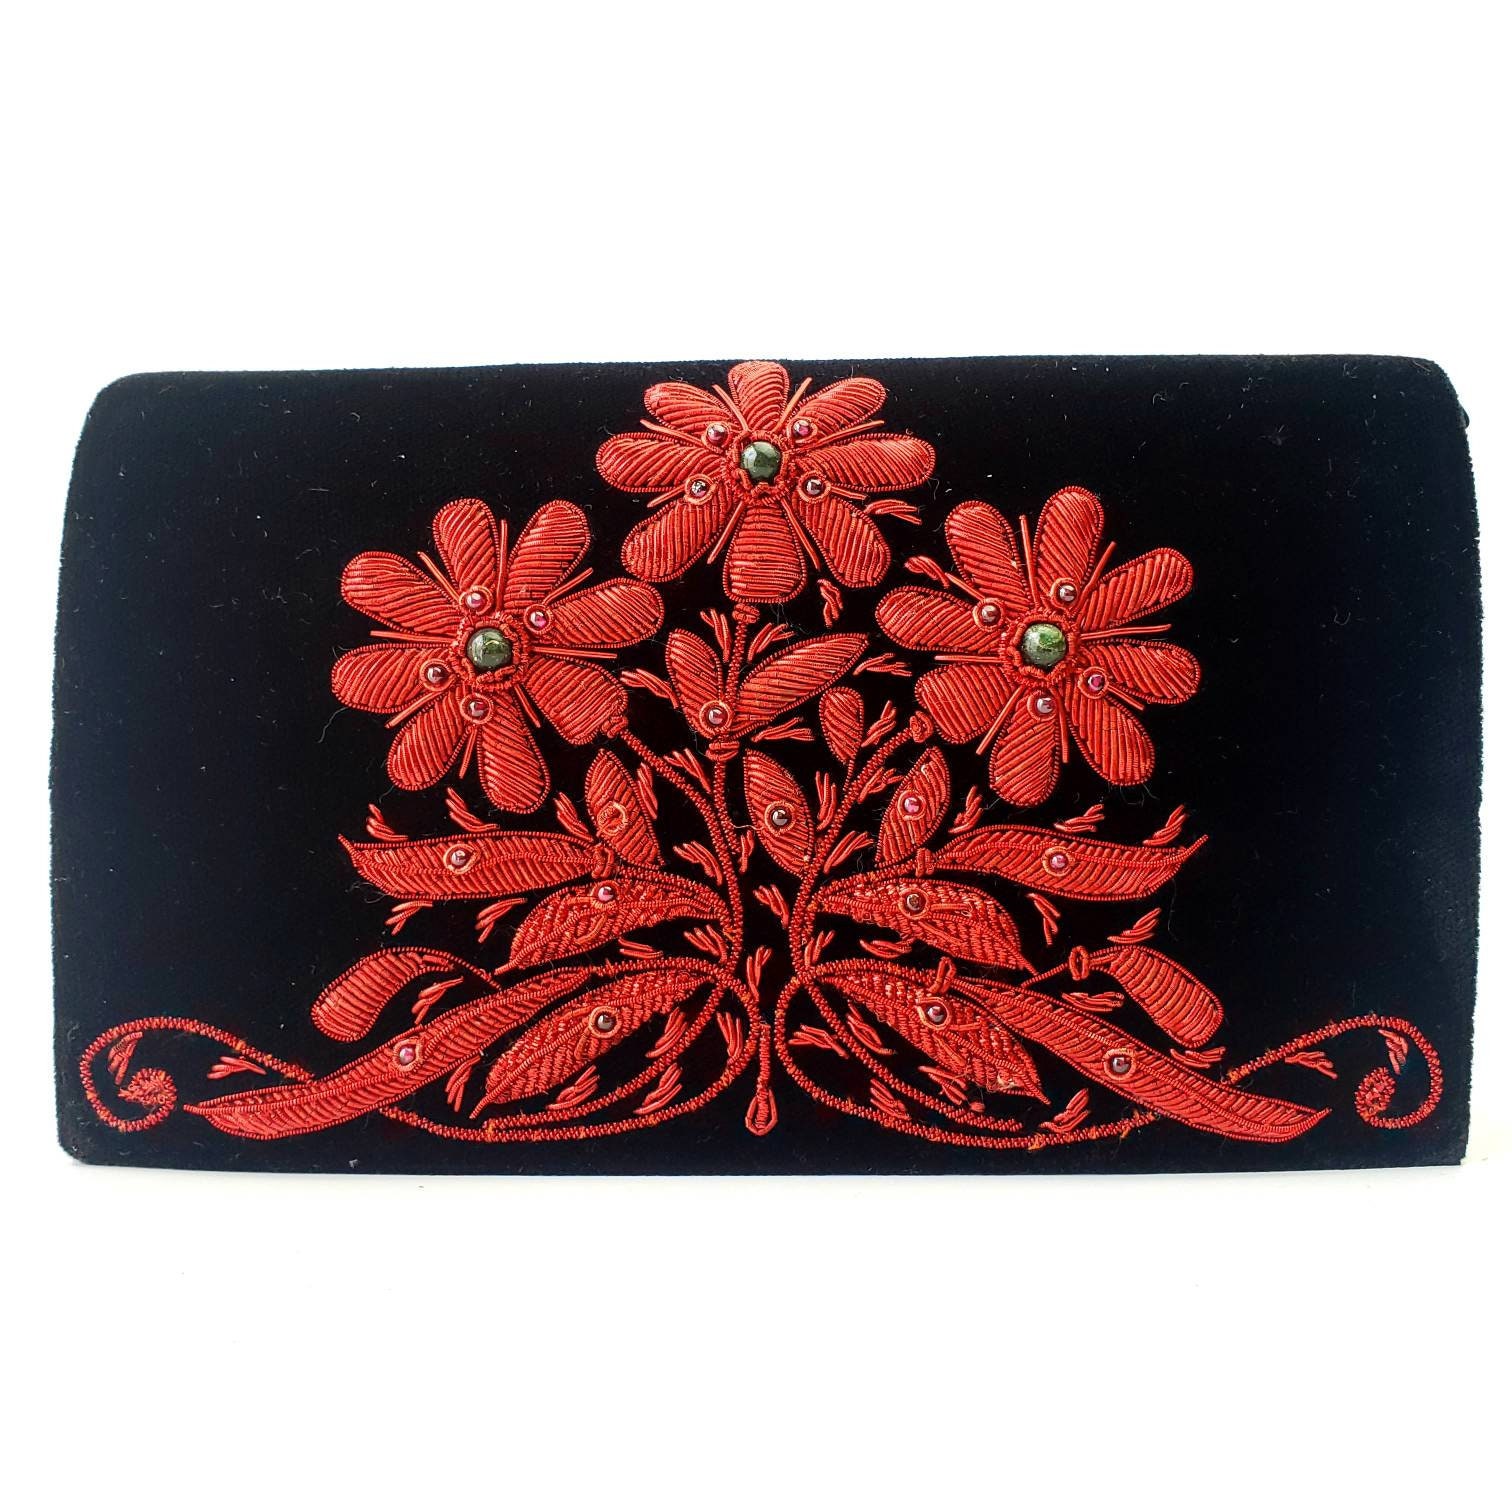 Black velvet evening clutch bag hand embroidered with red daisies, zardozi  purse, OOAK statement clutch, Valentines Day gift for her